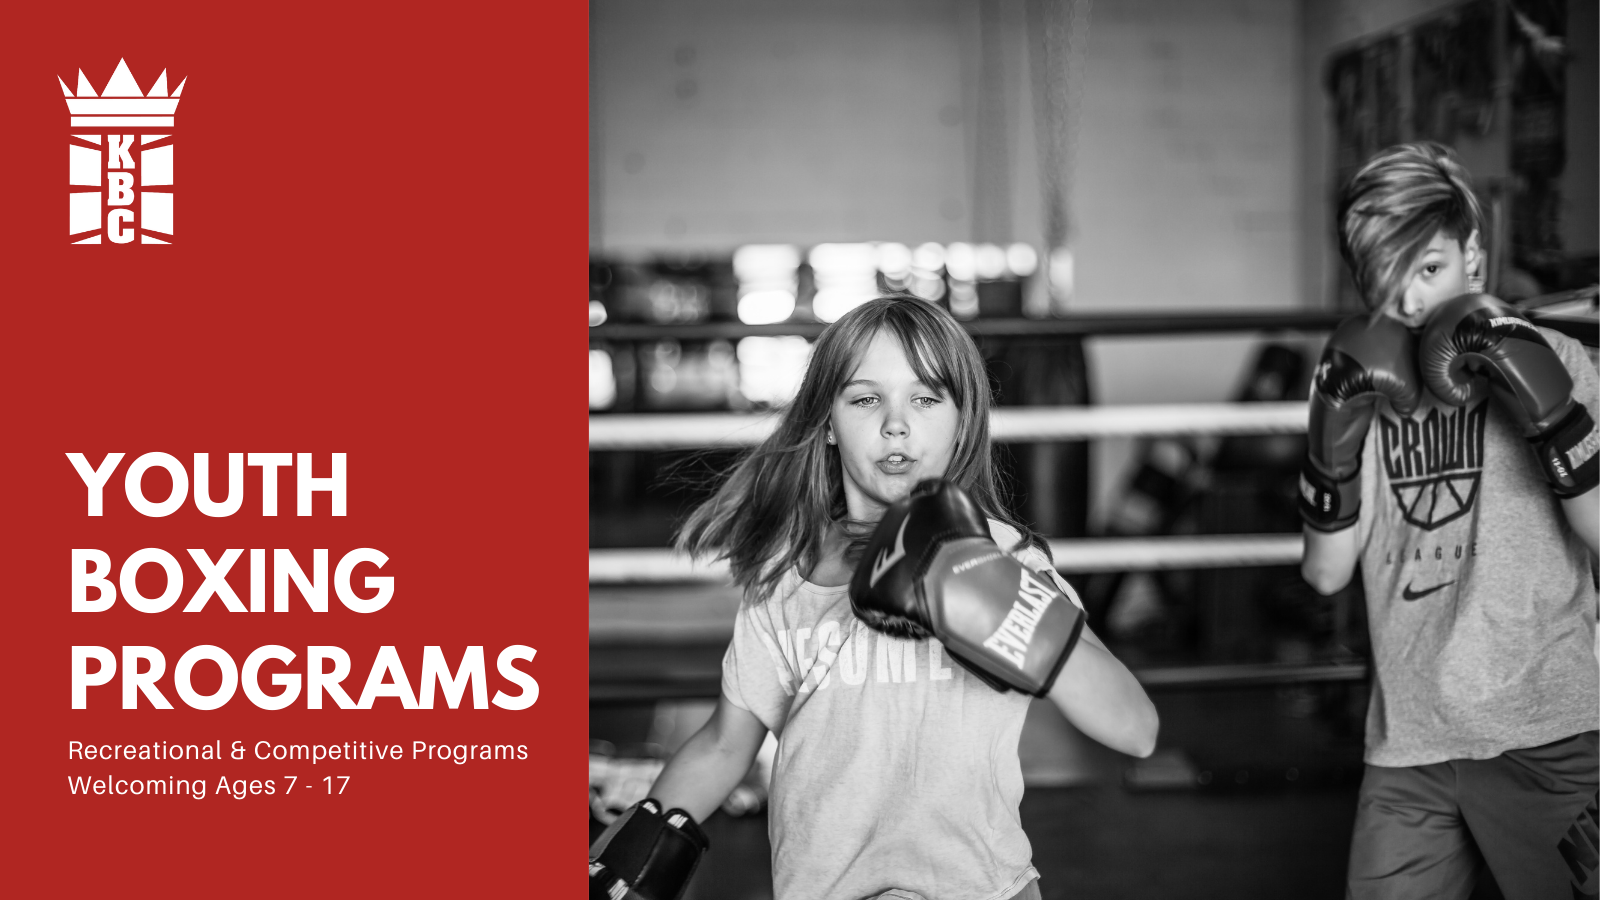 Calling All Kids & Teens – Boxing Is BACK! Kids 7+, Girls Only and Co-Ed Classes Now Available